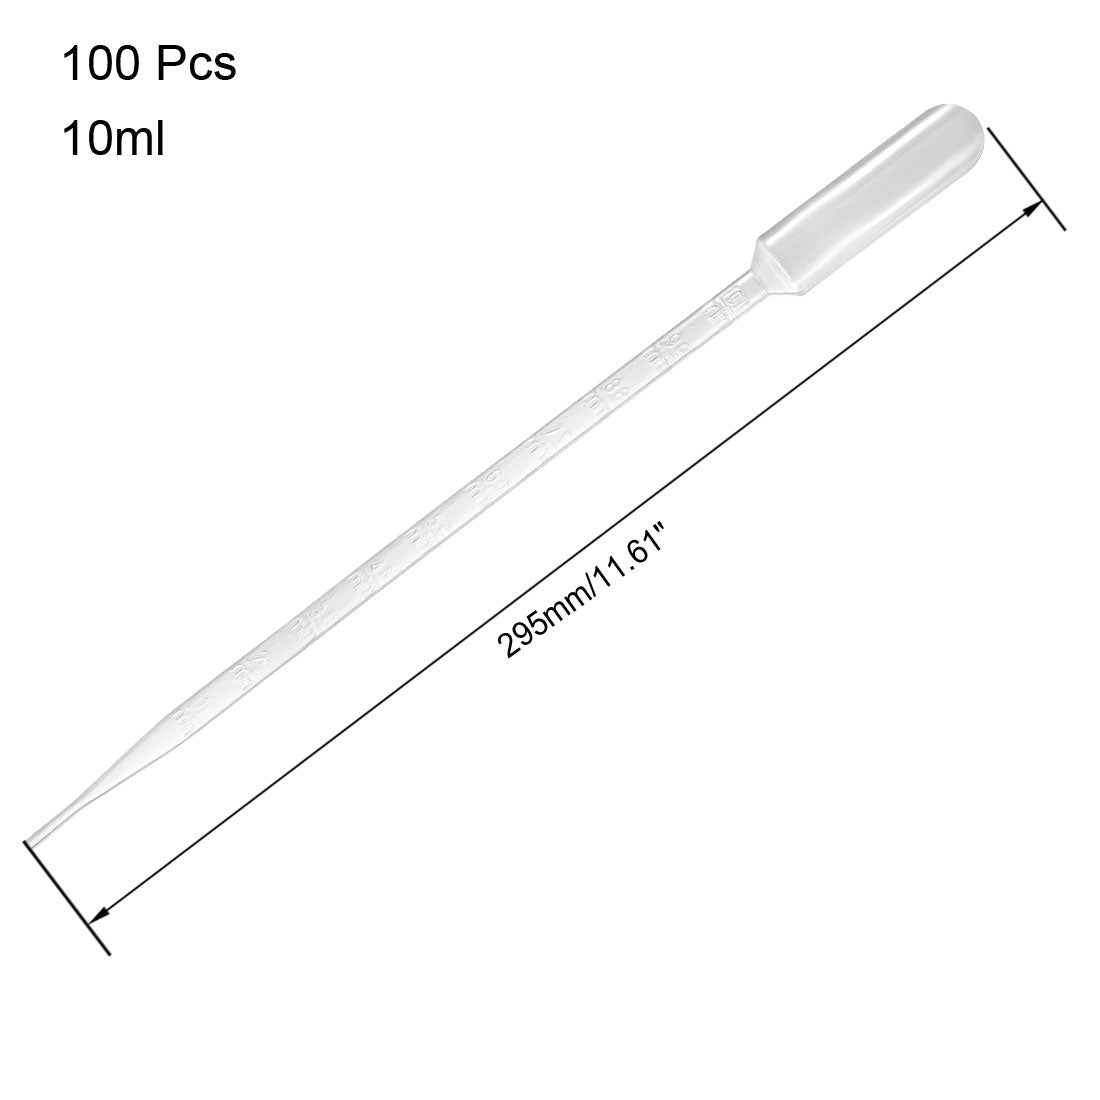 uxcell Uxcell 100 Pcs 10ml Disposable Pasteur Pipettes Test Tubes Liquid Drop Droppers Graduated 295mm Long